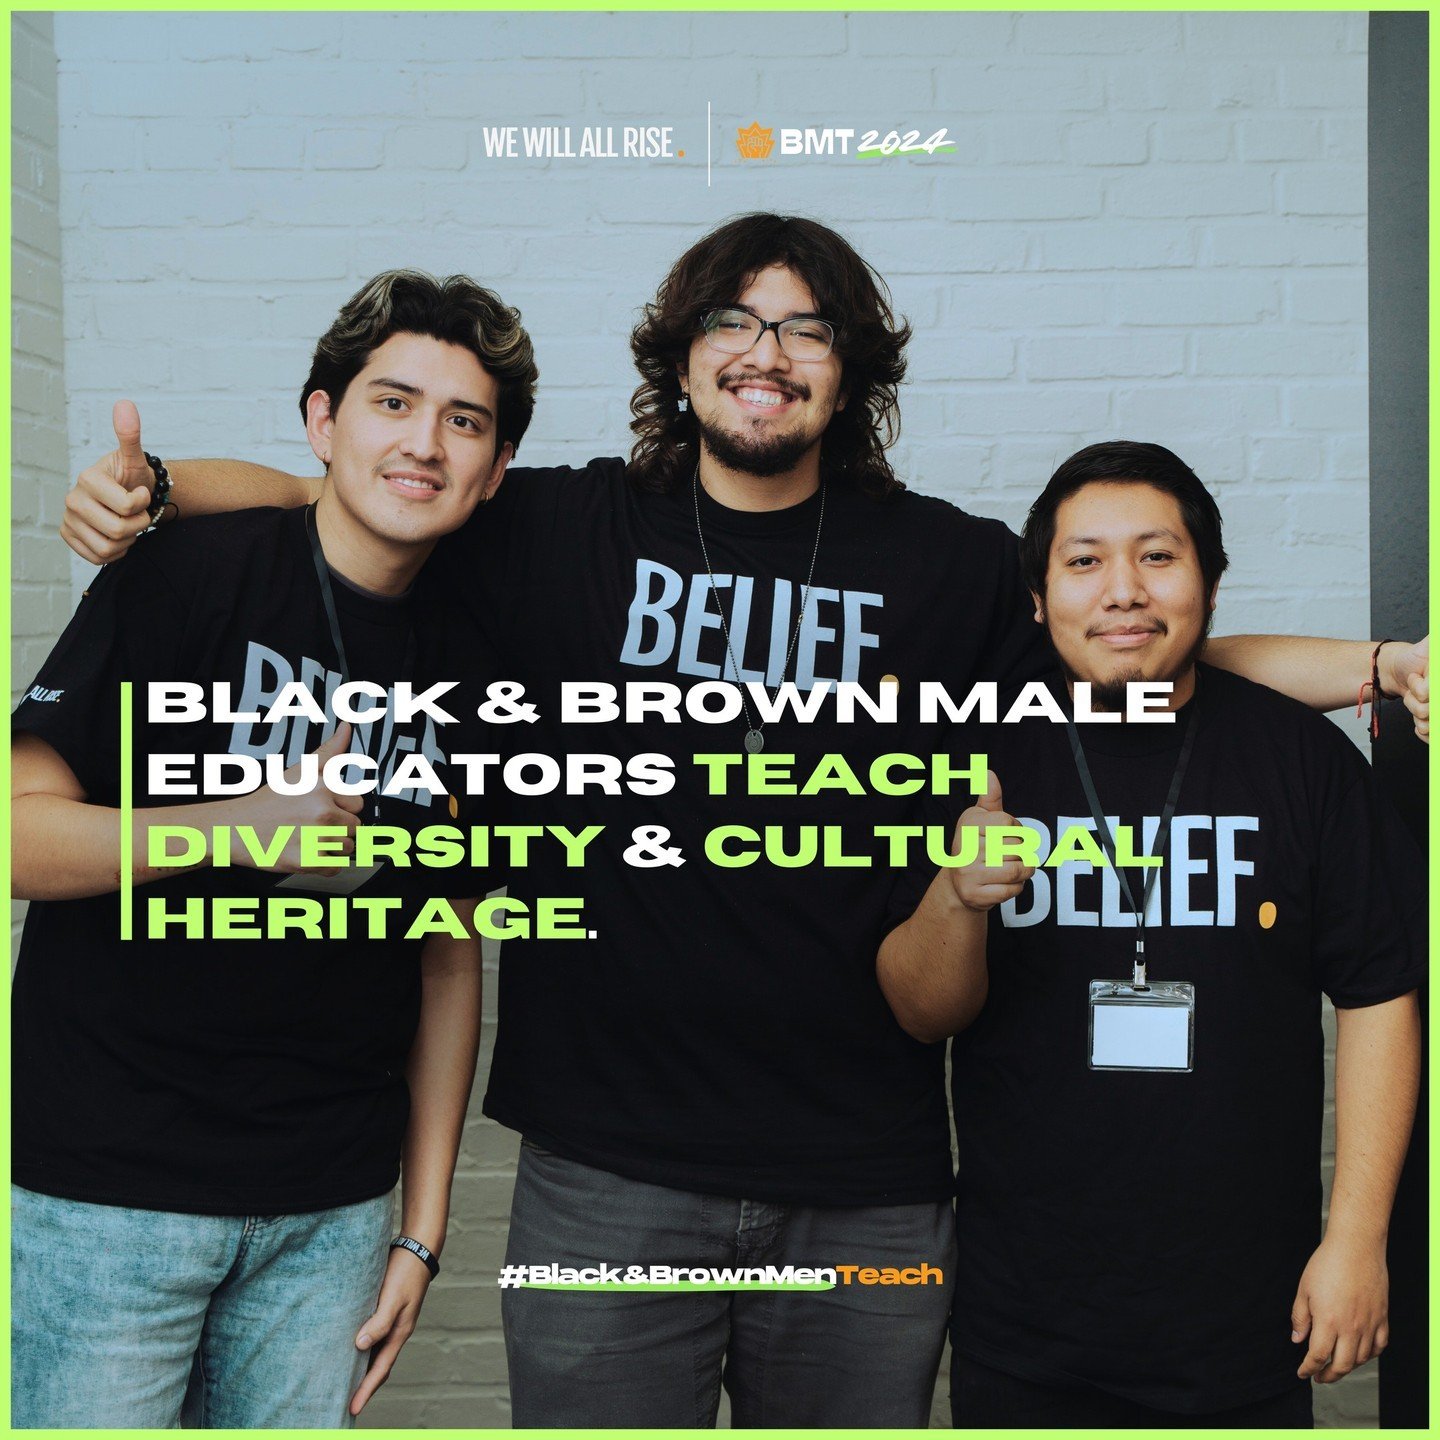 Our #BlackandBrownMenTeach campaign (#BMT2024), is a multiregional effort to raise awareness and promote increased representation of Black and Brown male educators in classrooms and schools. Help us spread the word and join the campaign to support Al